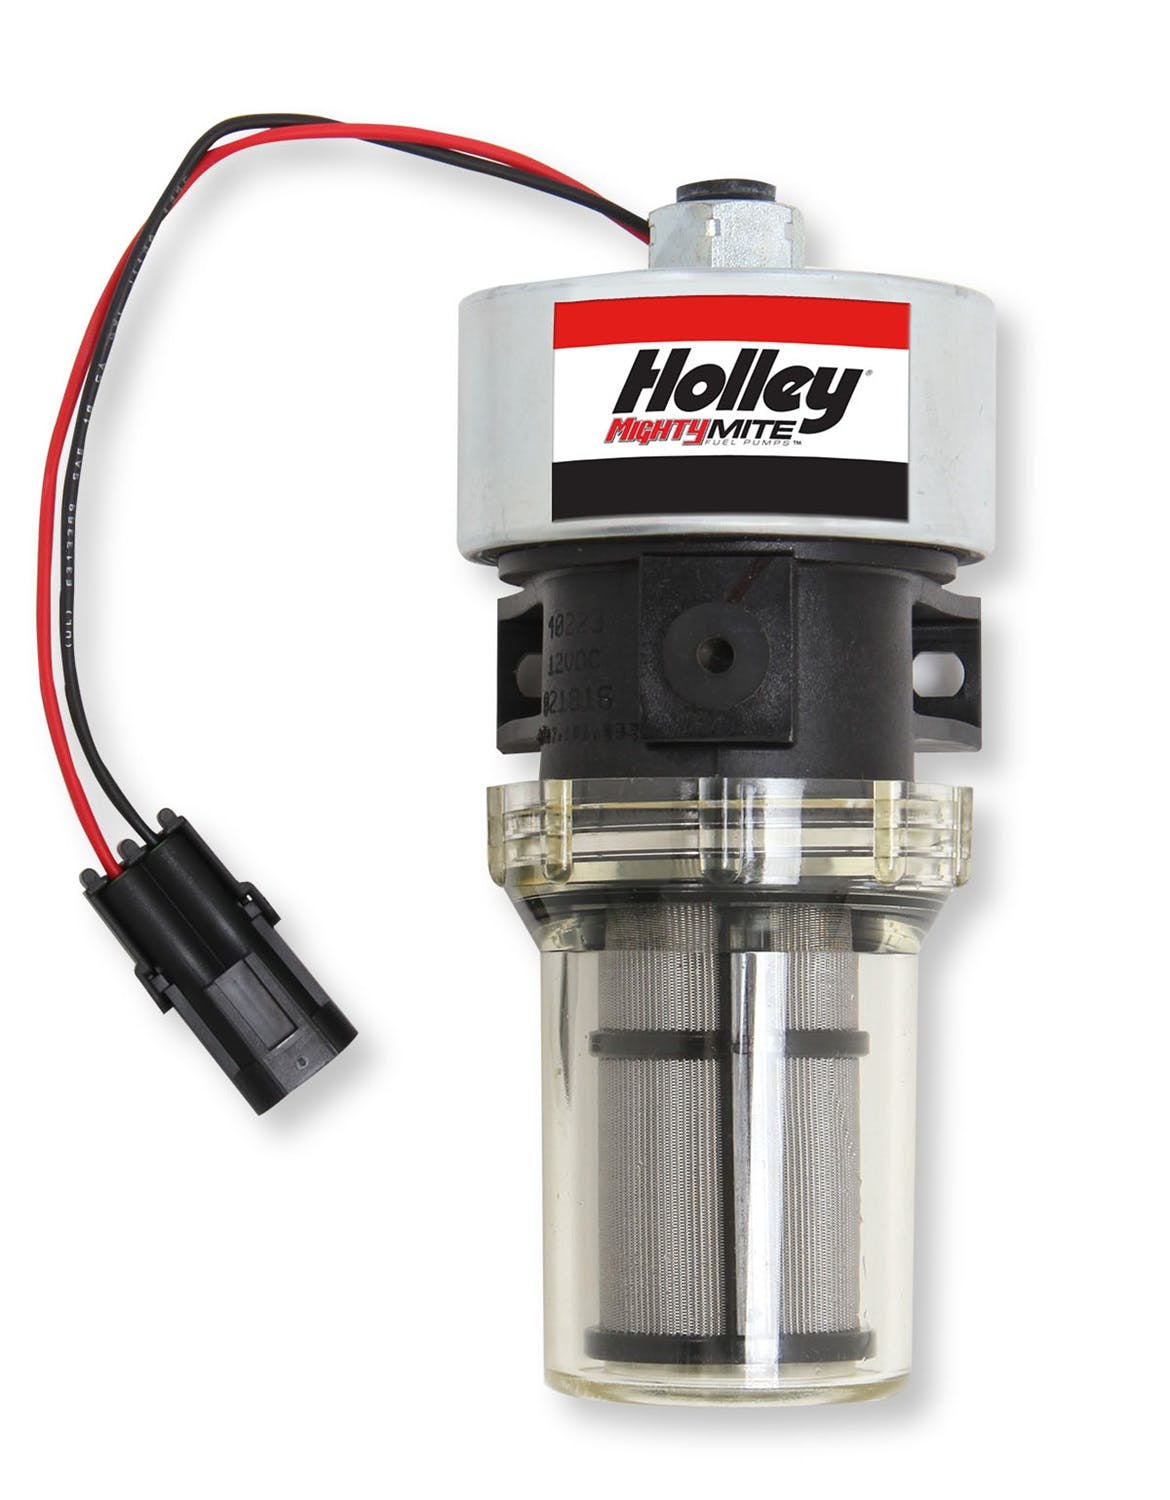 Holley 12-430 MIGHTY MITE FP 9-11.5 PSI